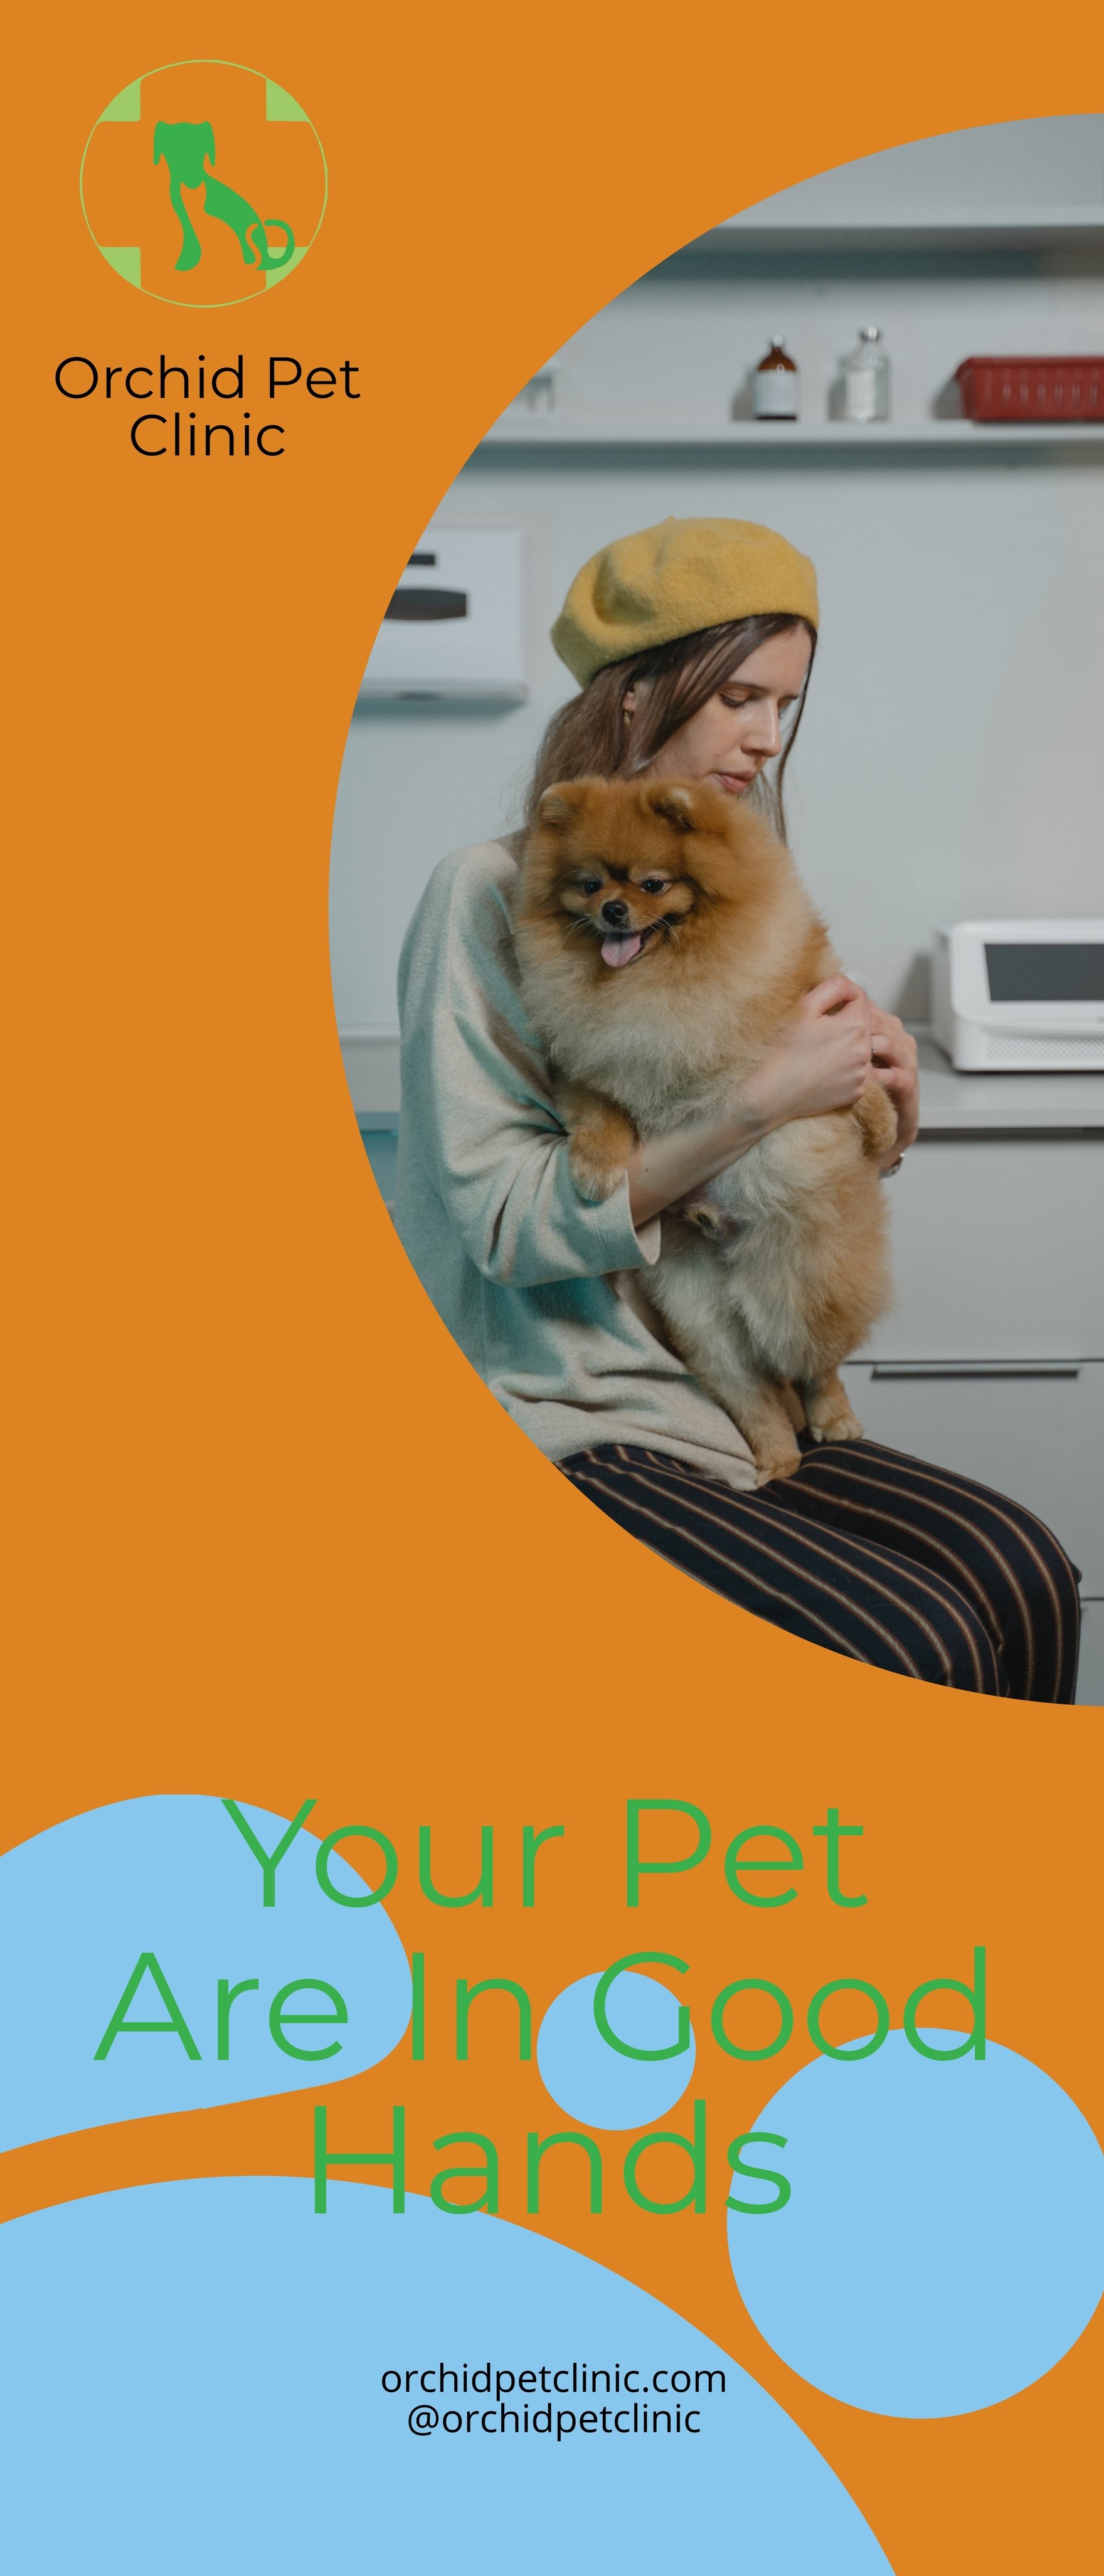 Free Veterinarian Clinic Advertising Roll Up Banner Template